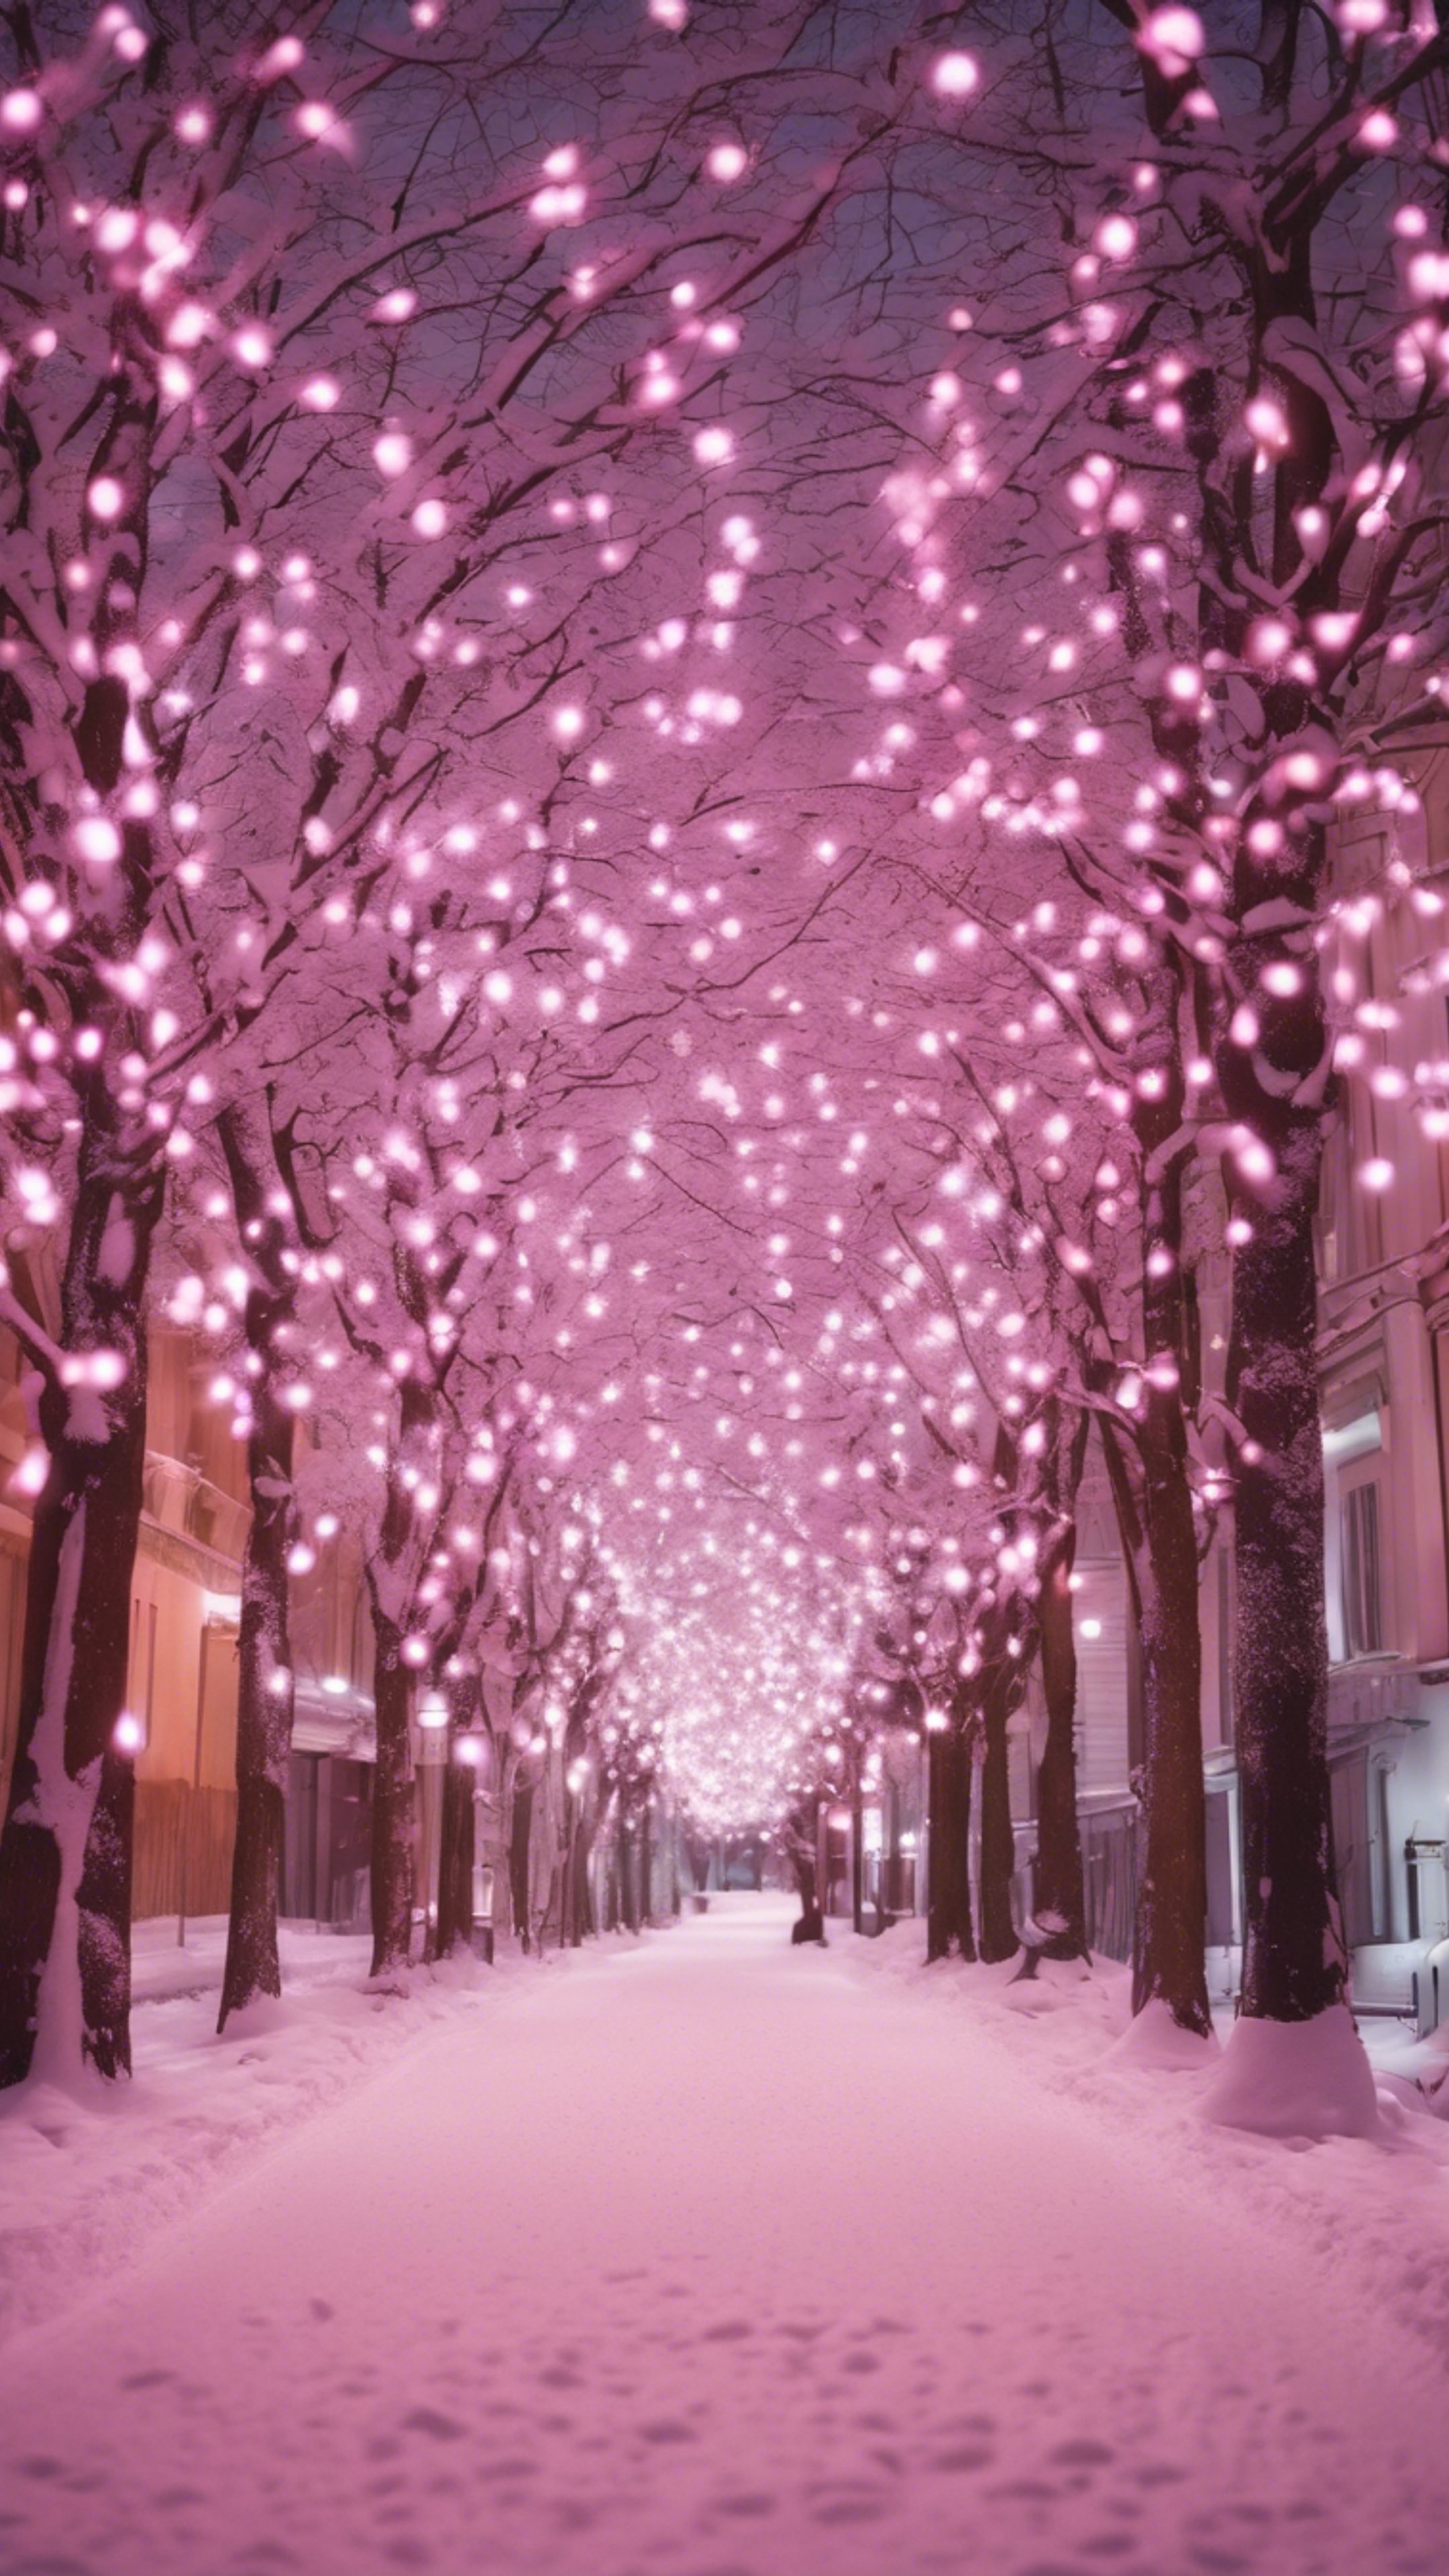 A snow-covered street illuminated by twinkling pink Christmas lights. Tapet[4ec6c372f2074900819e]